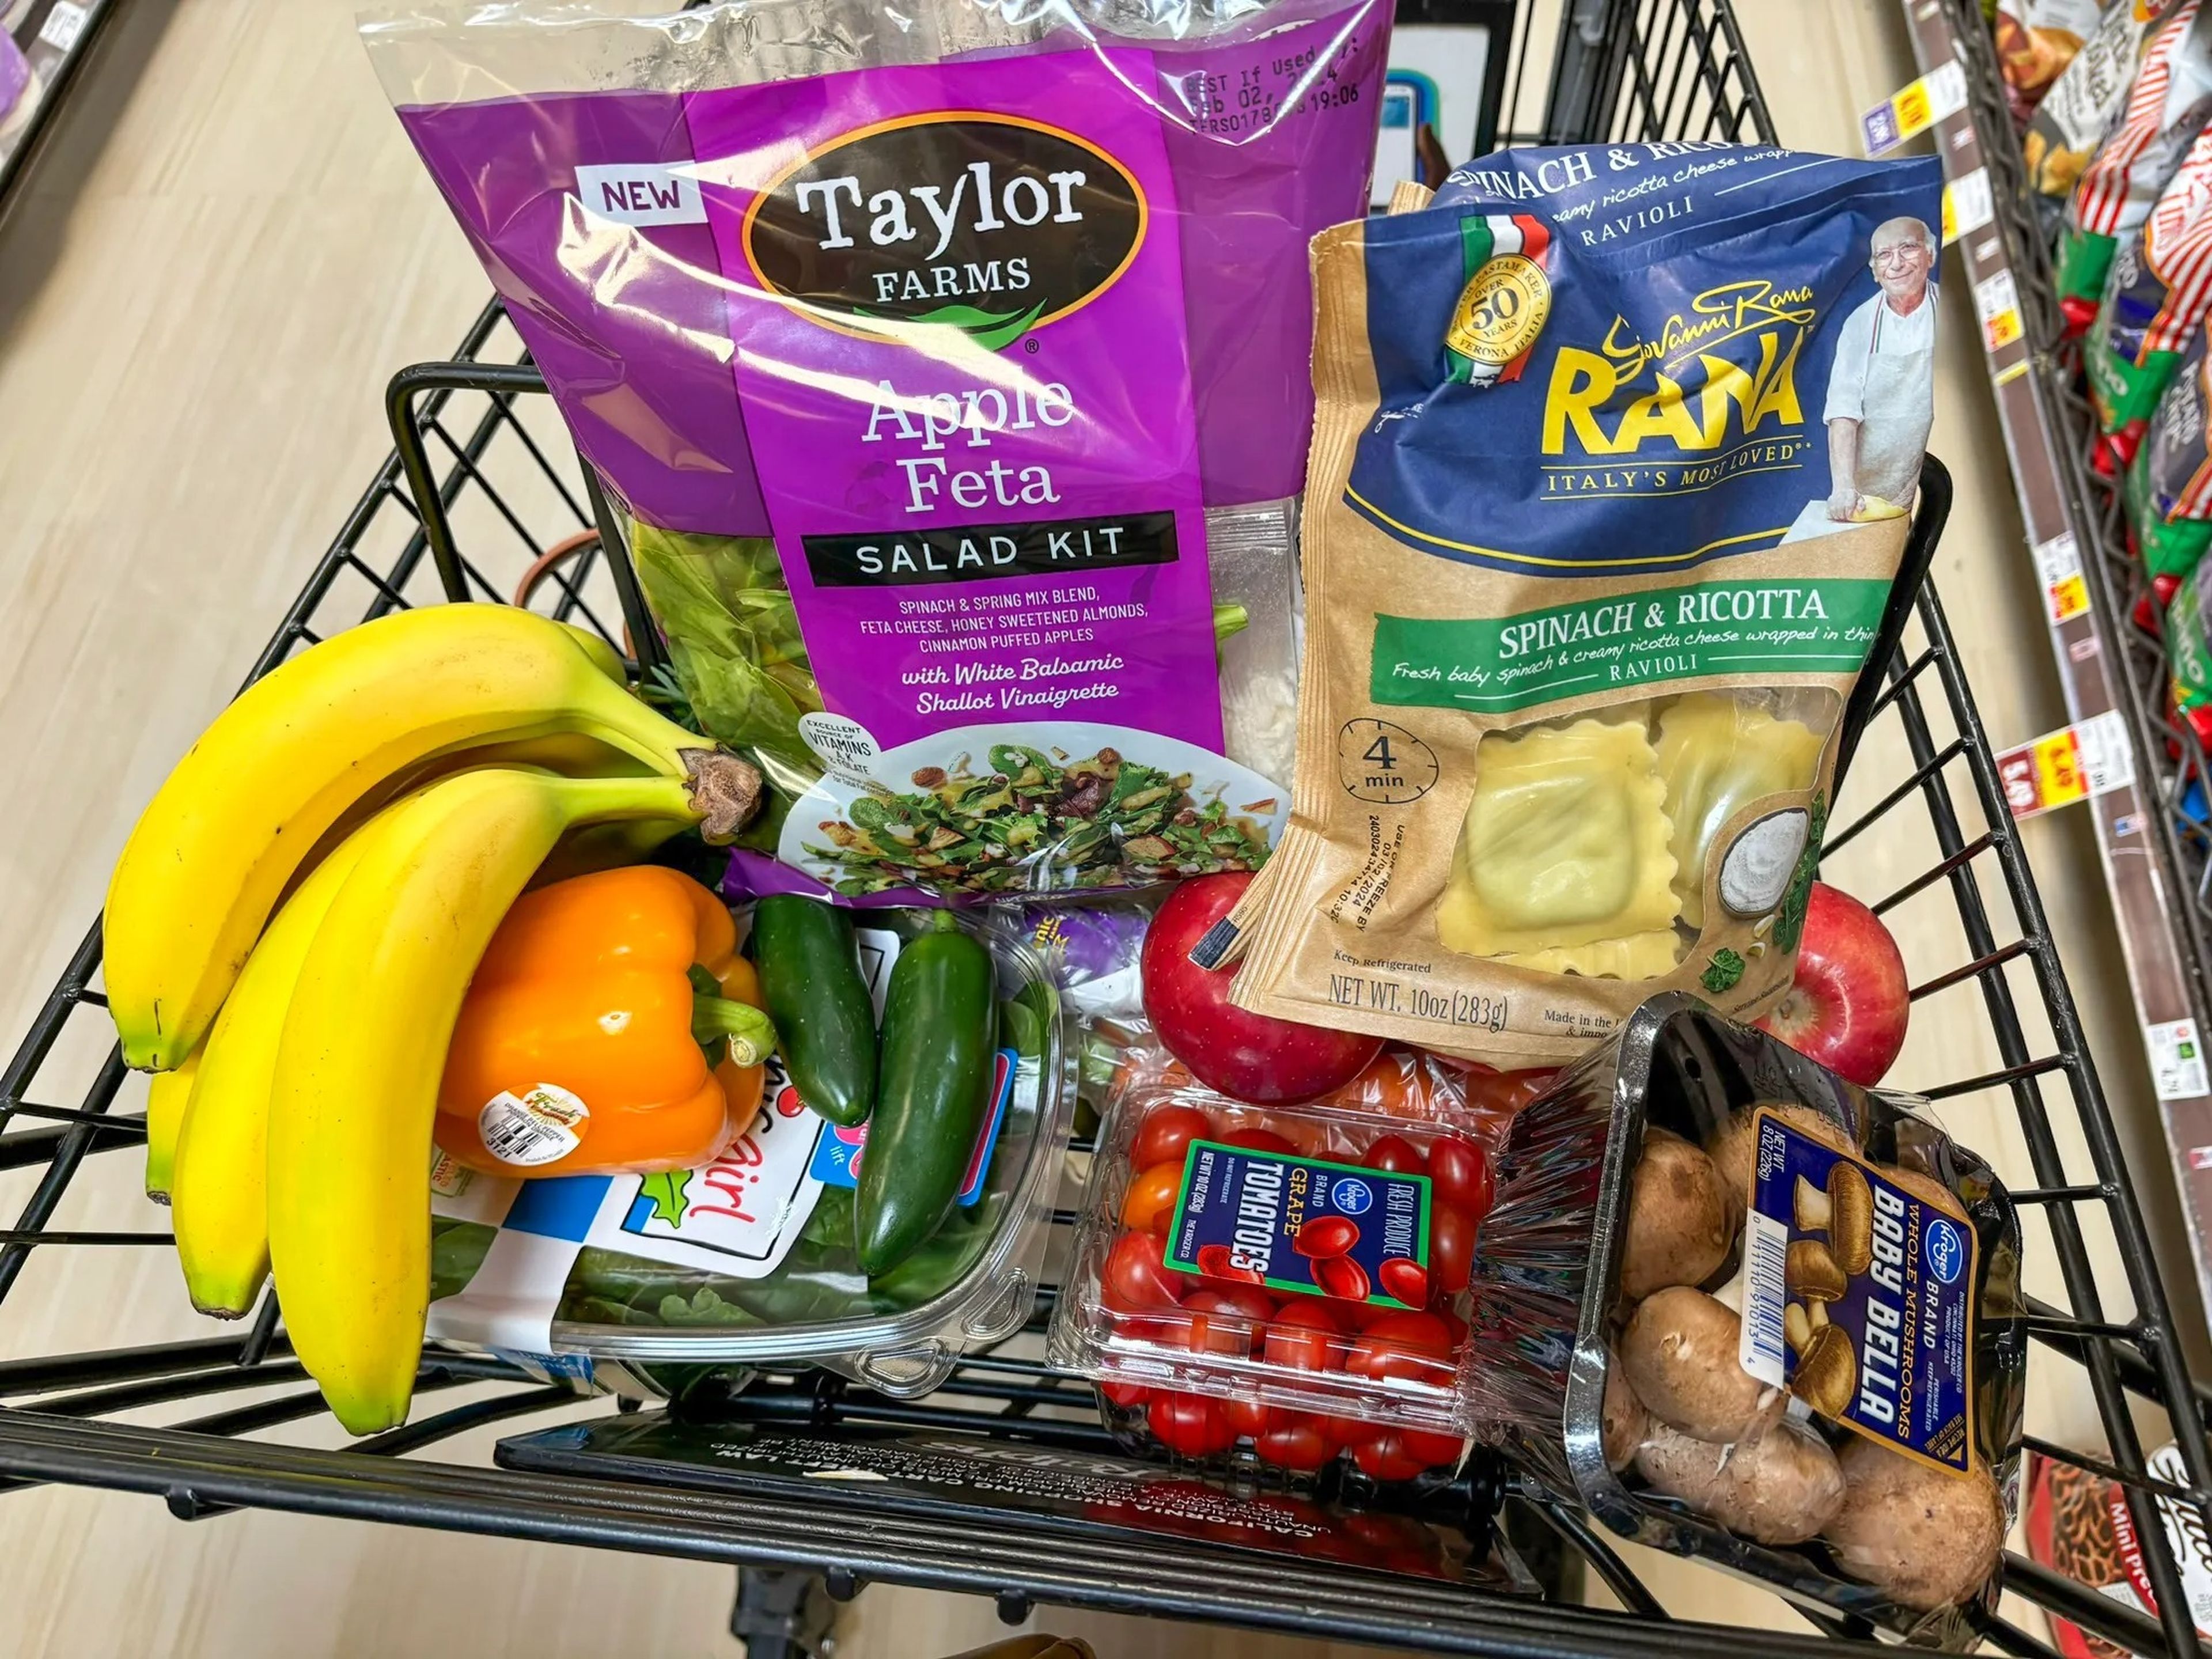 A grocery cart filled with tomatoes, apples, a package of mushrooms, peppers, bananas, an apple-feta salad kit with a purple label, and a bag of Rana spinach-and-ricotta pasta